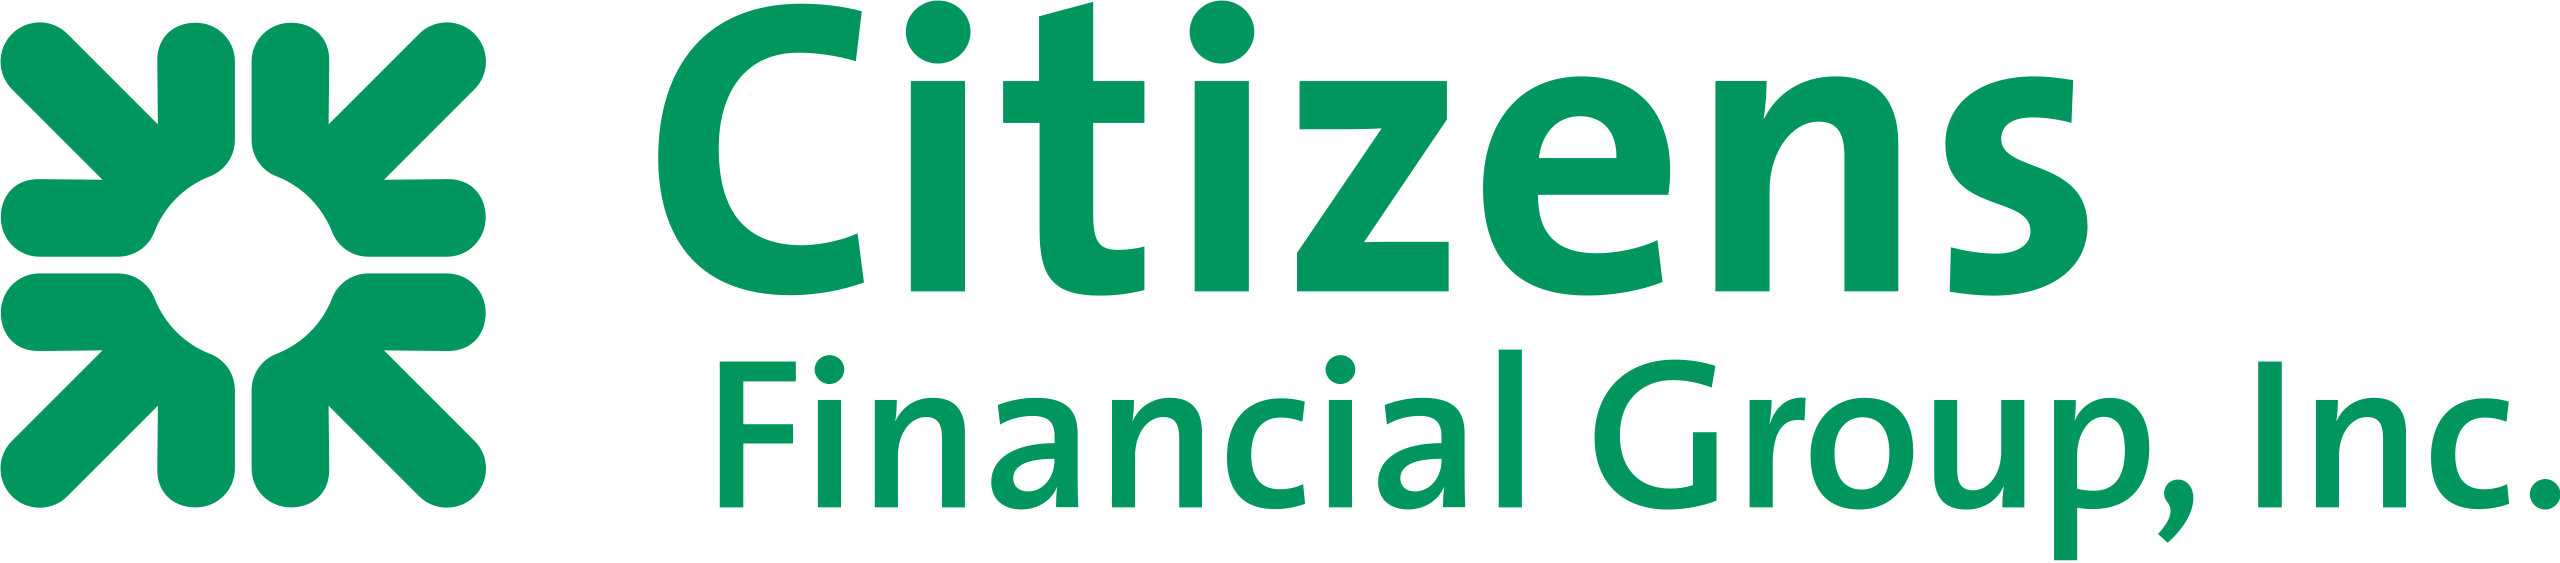 citizens financial group inc providence ri